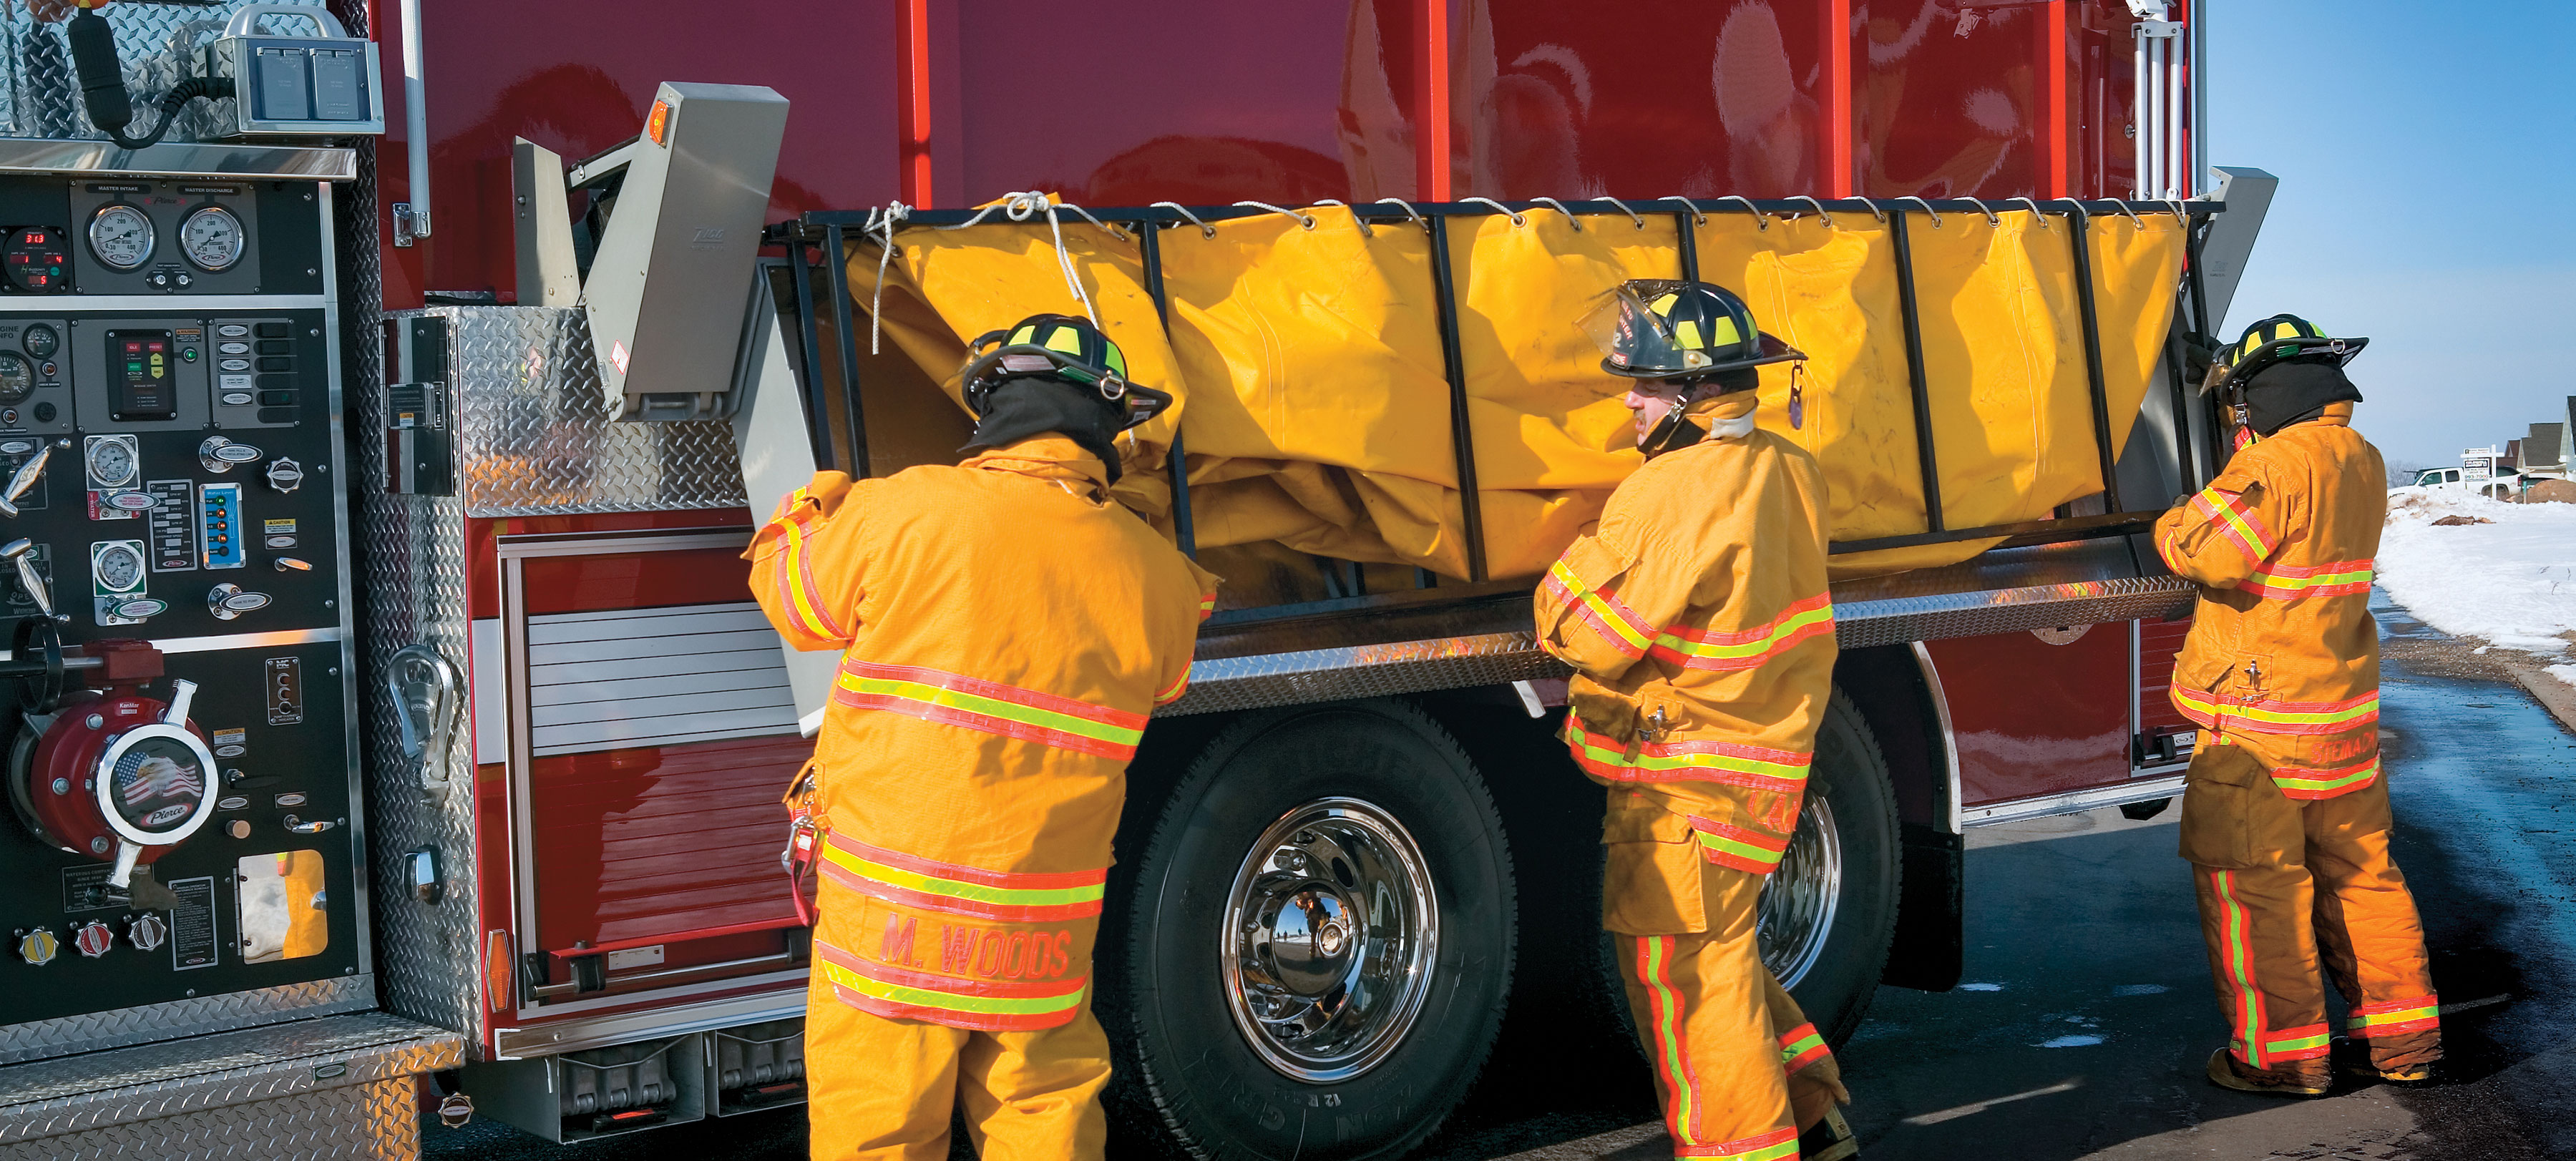 Three firefighters working on a Pierce Tanker Fire Truck parked outside in a parking lot with swing-down folding storage on the driver’s side. 